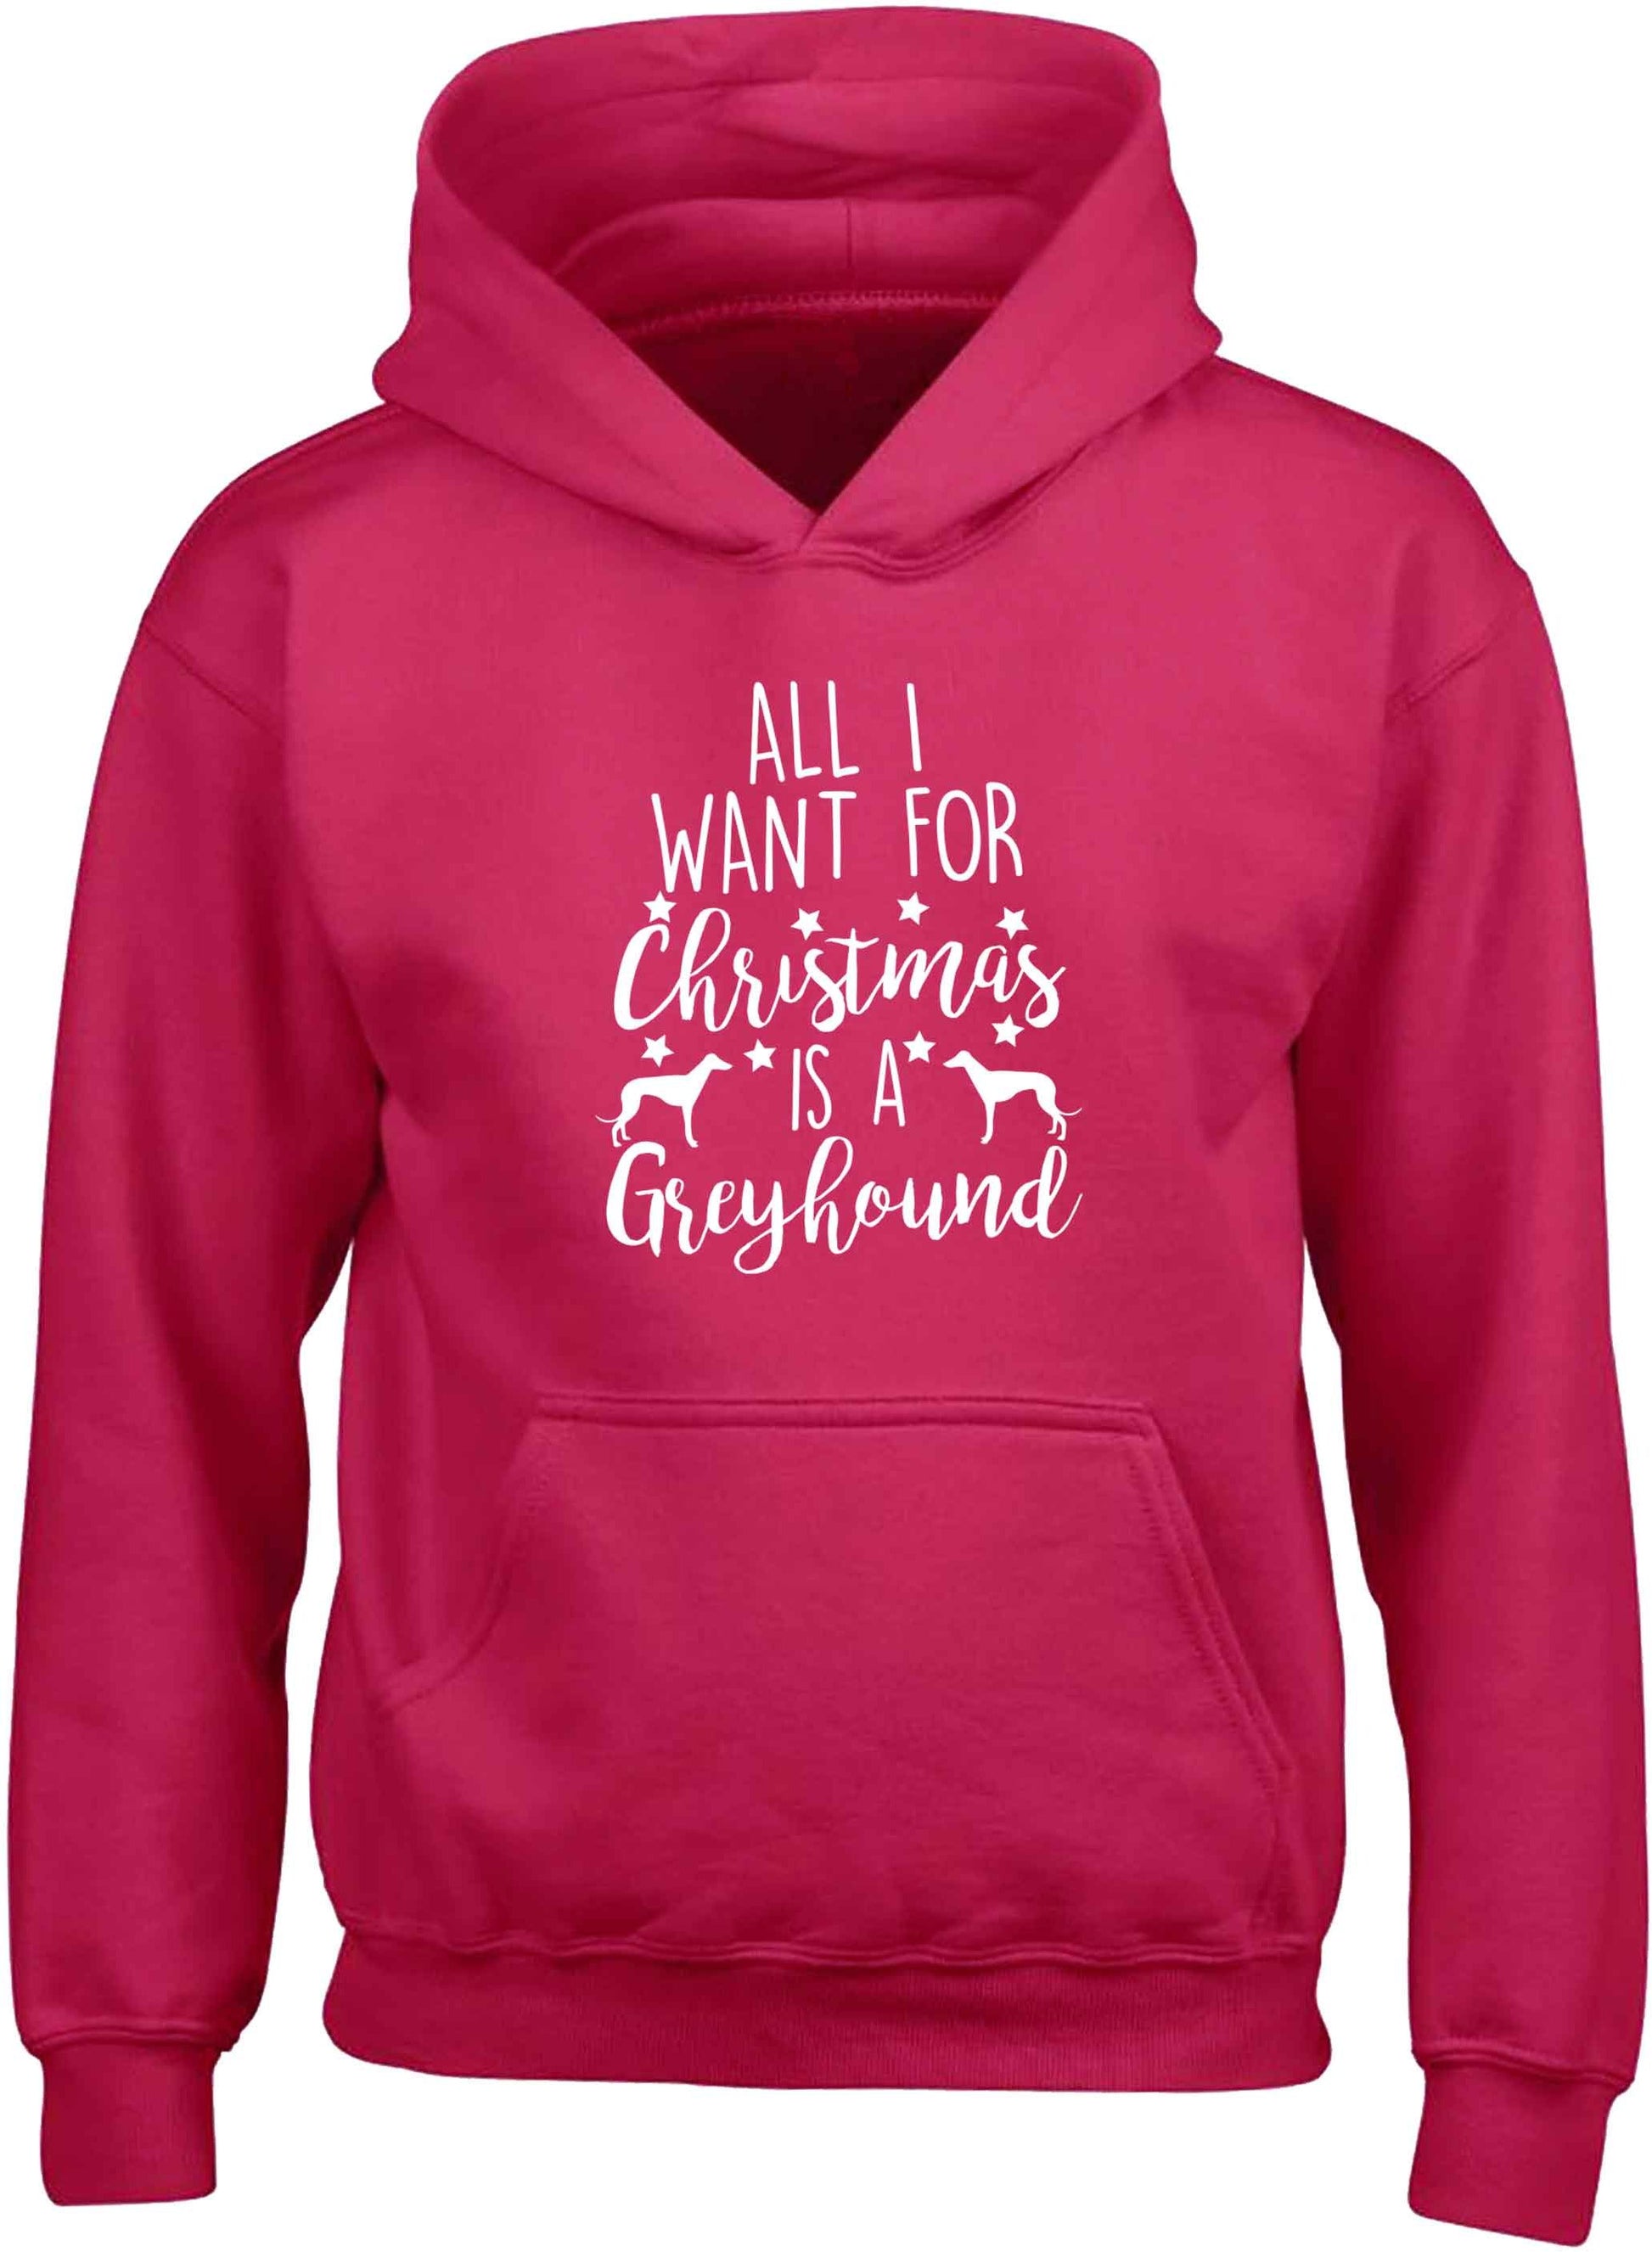 All I want for Christmas is a greyhound children's pink hoodie 12-13 Years